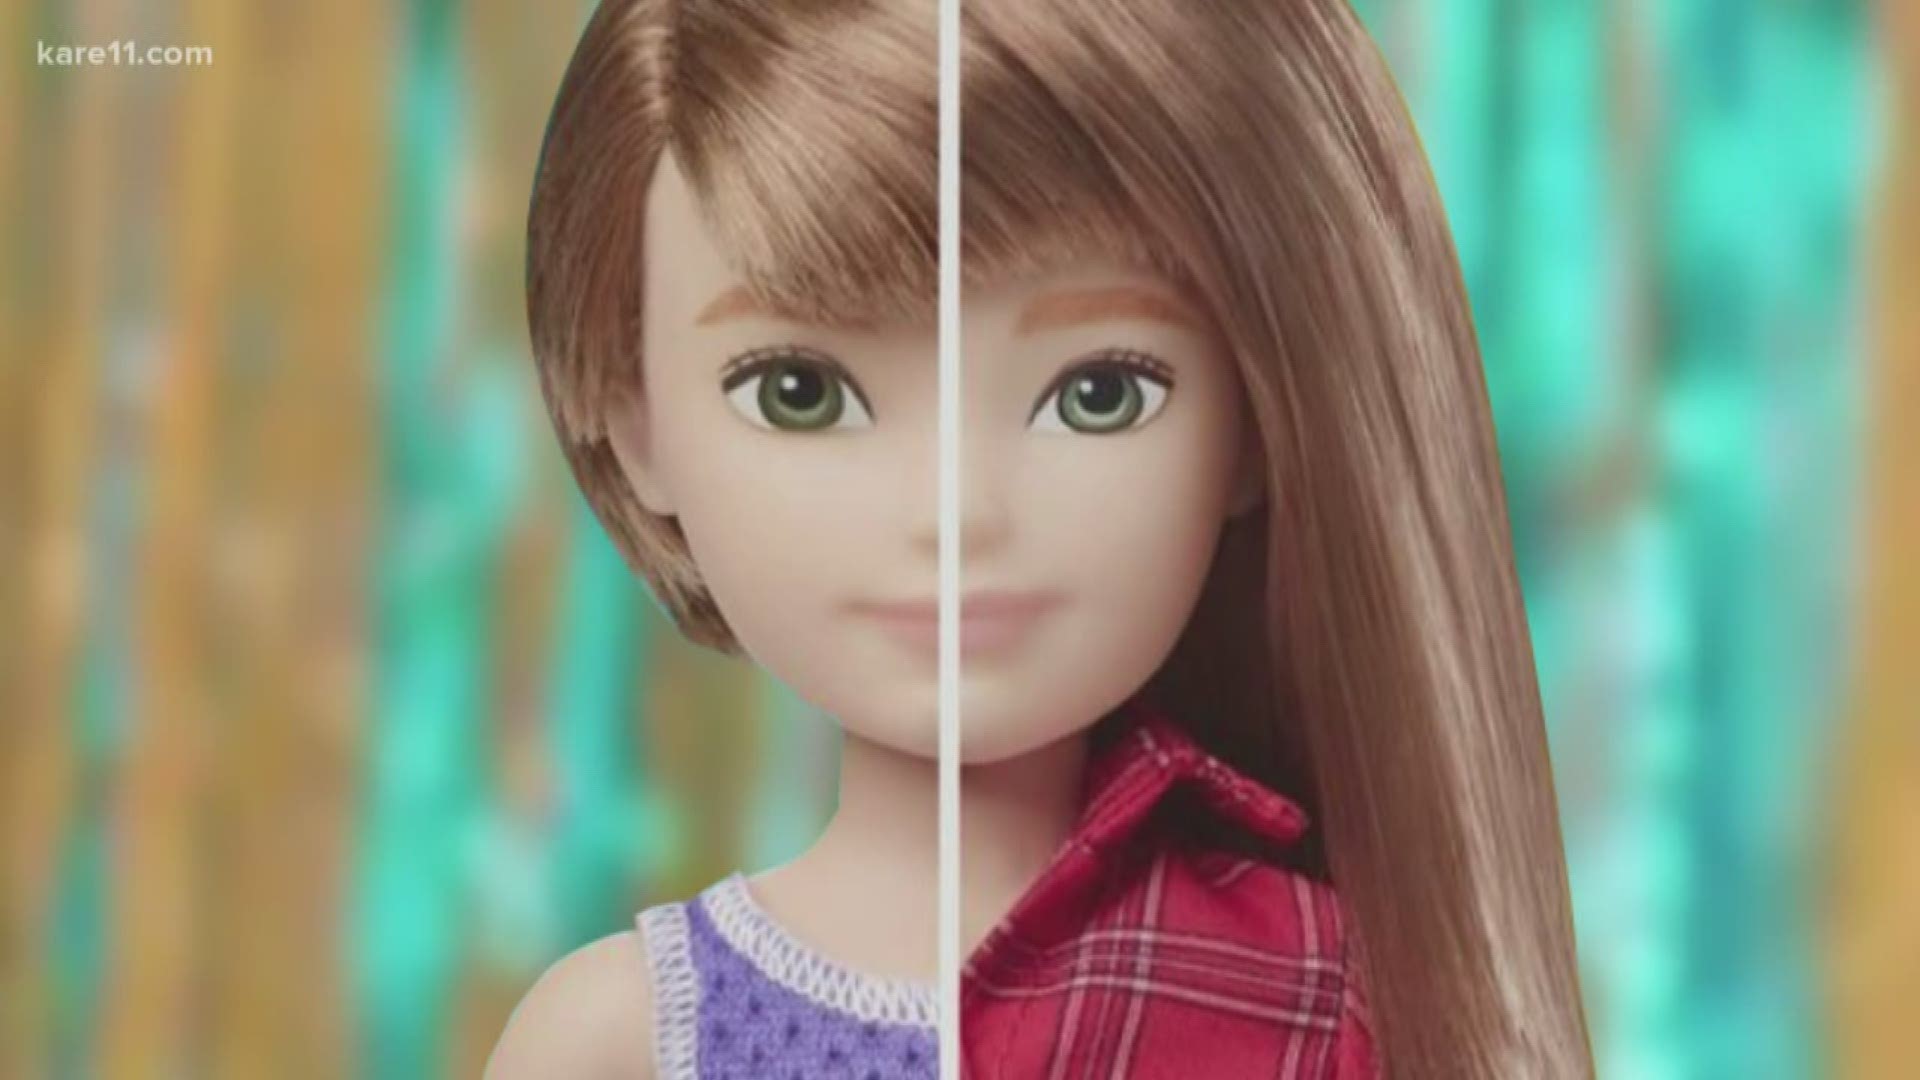 Mattel, the makers of Barbie, is rolling out a new line of gender-neutral dolls.